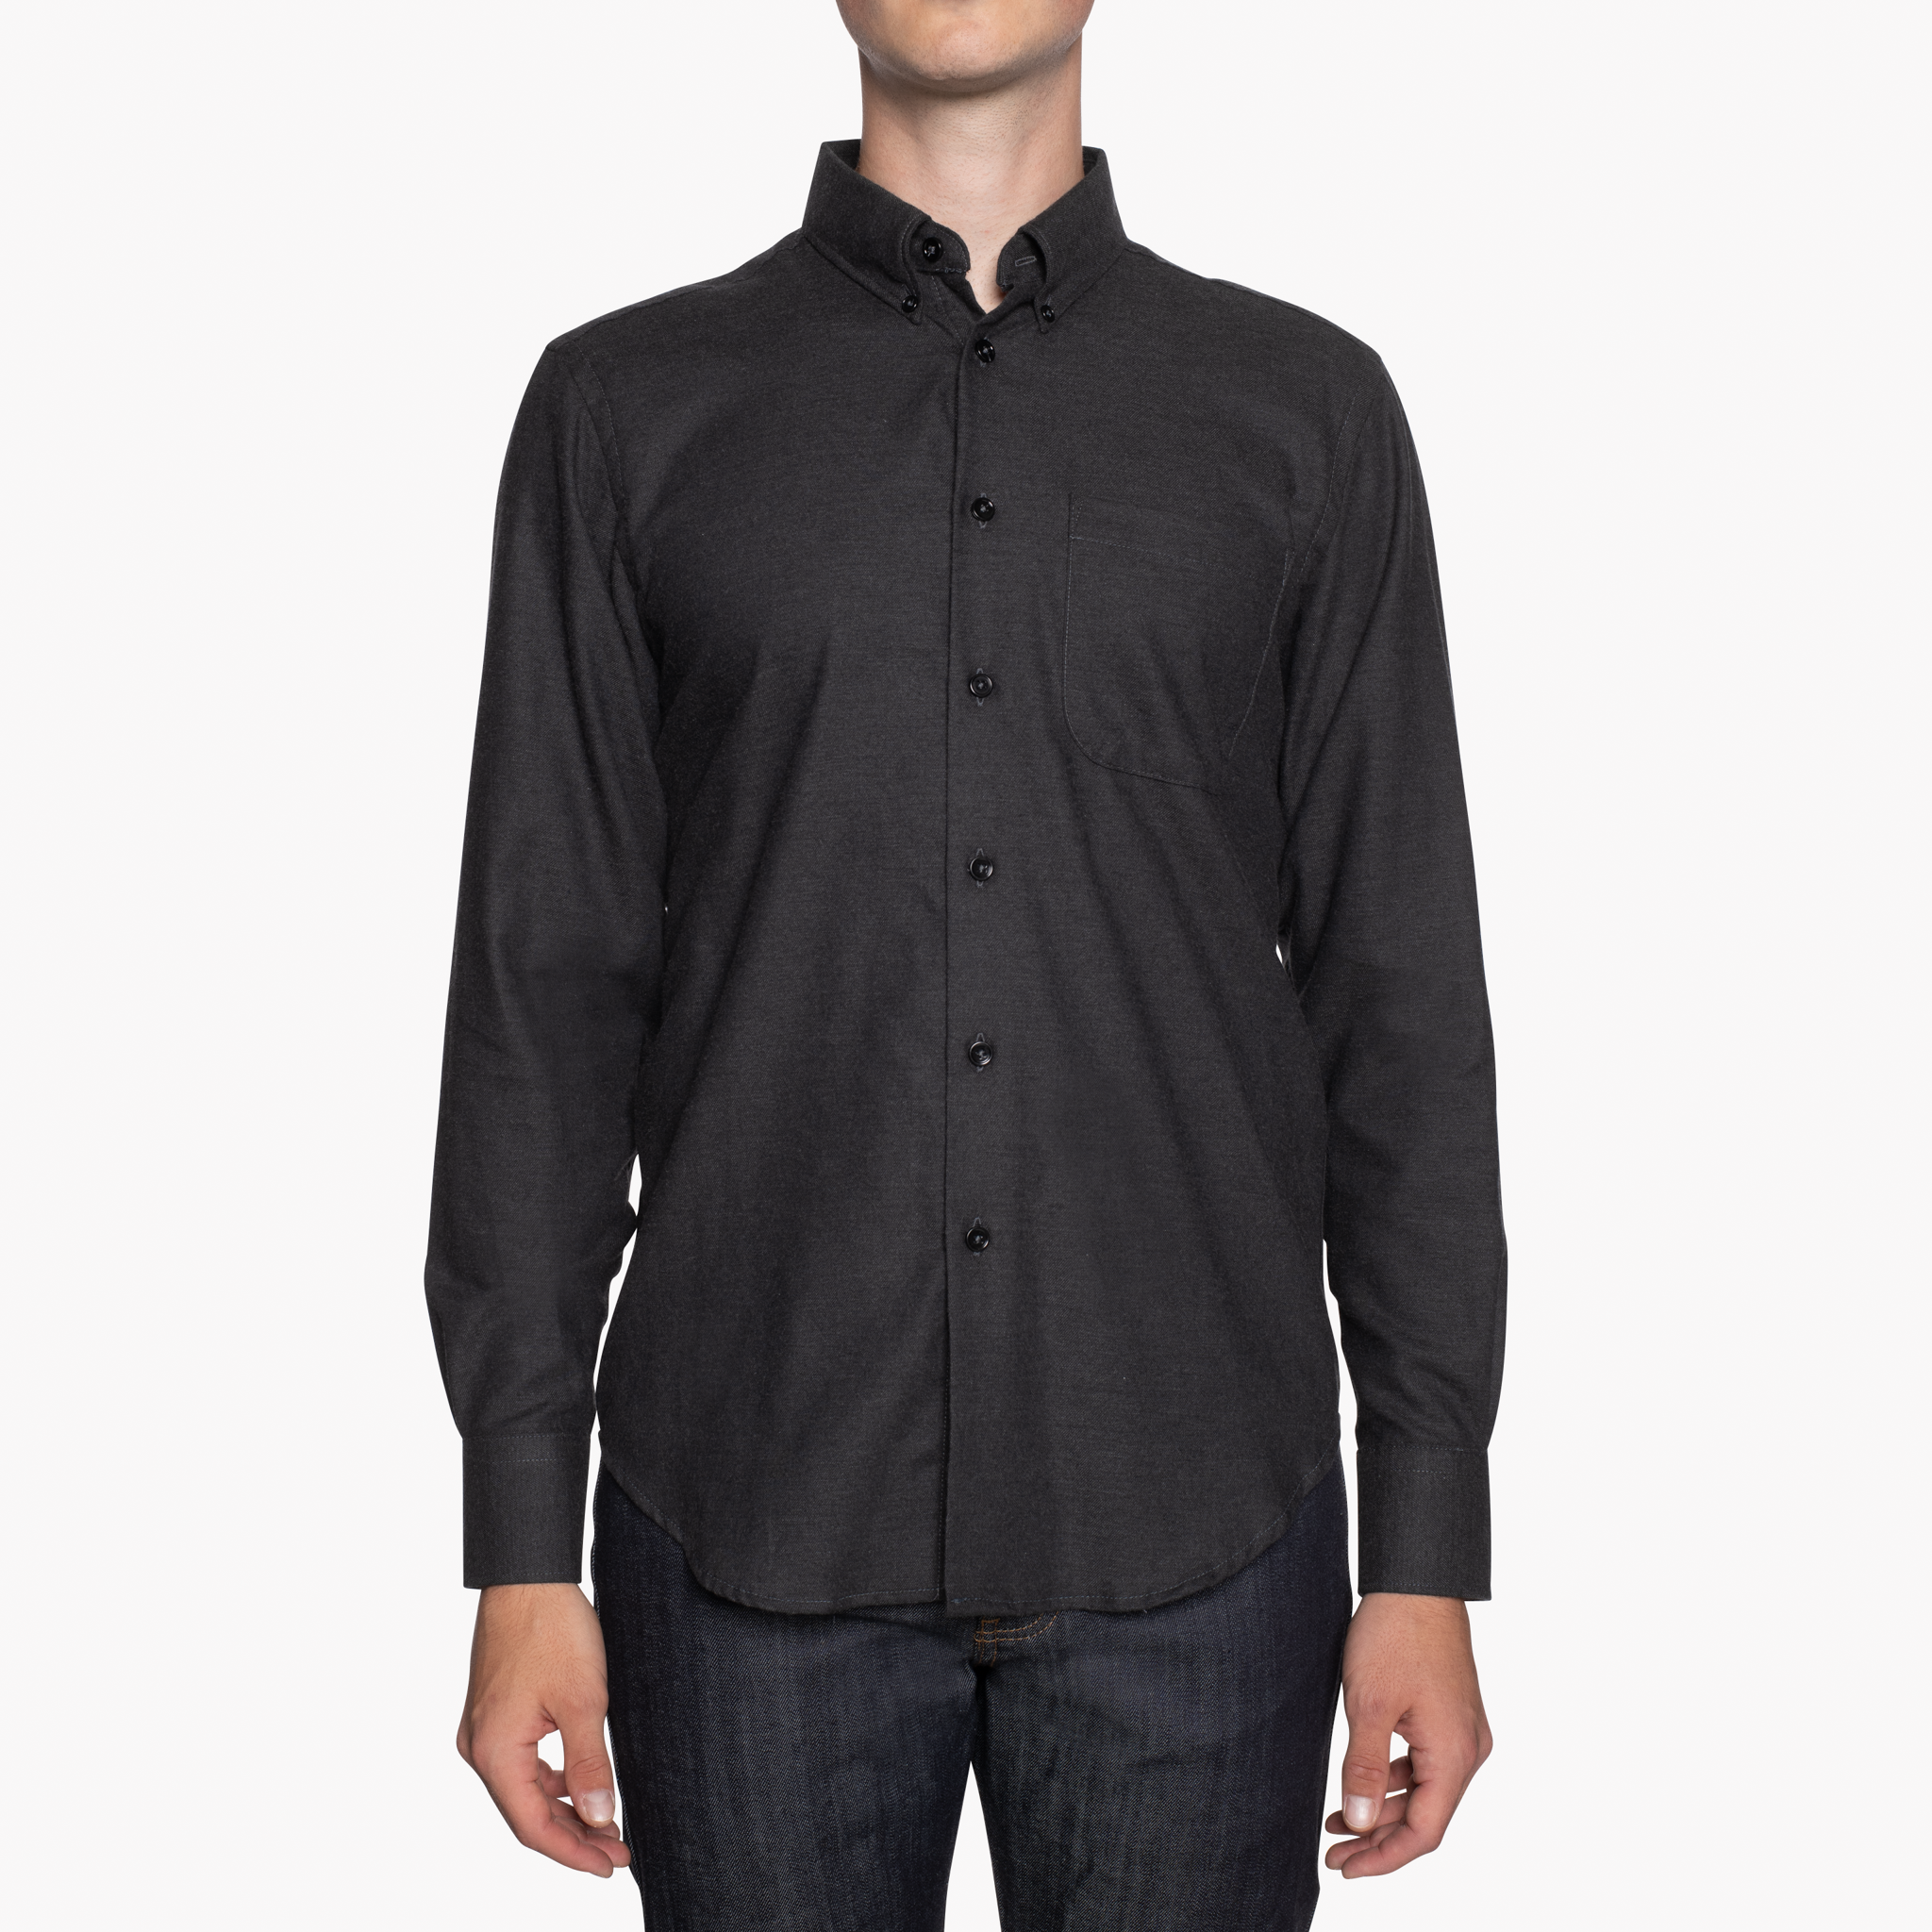  Easy Shirt - Soft Twill - Charcoal - front 